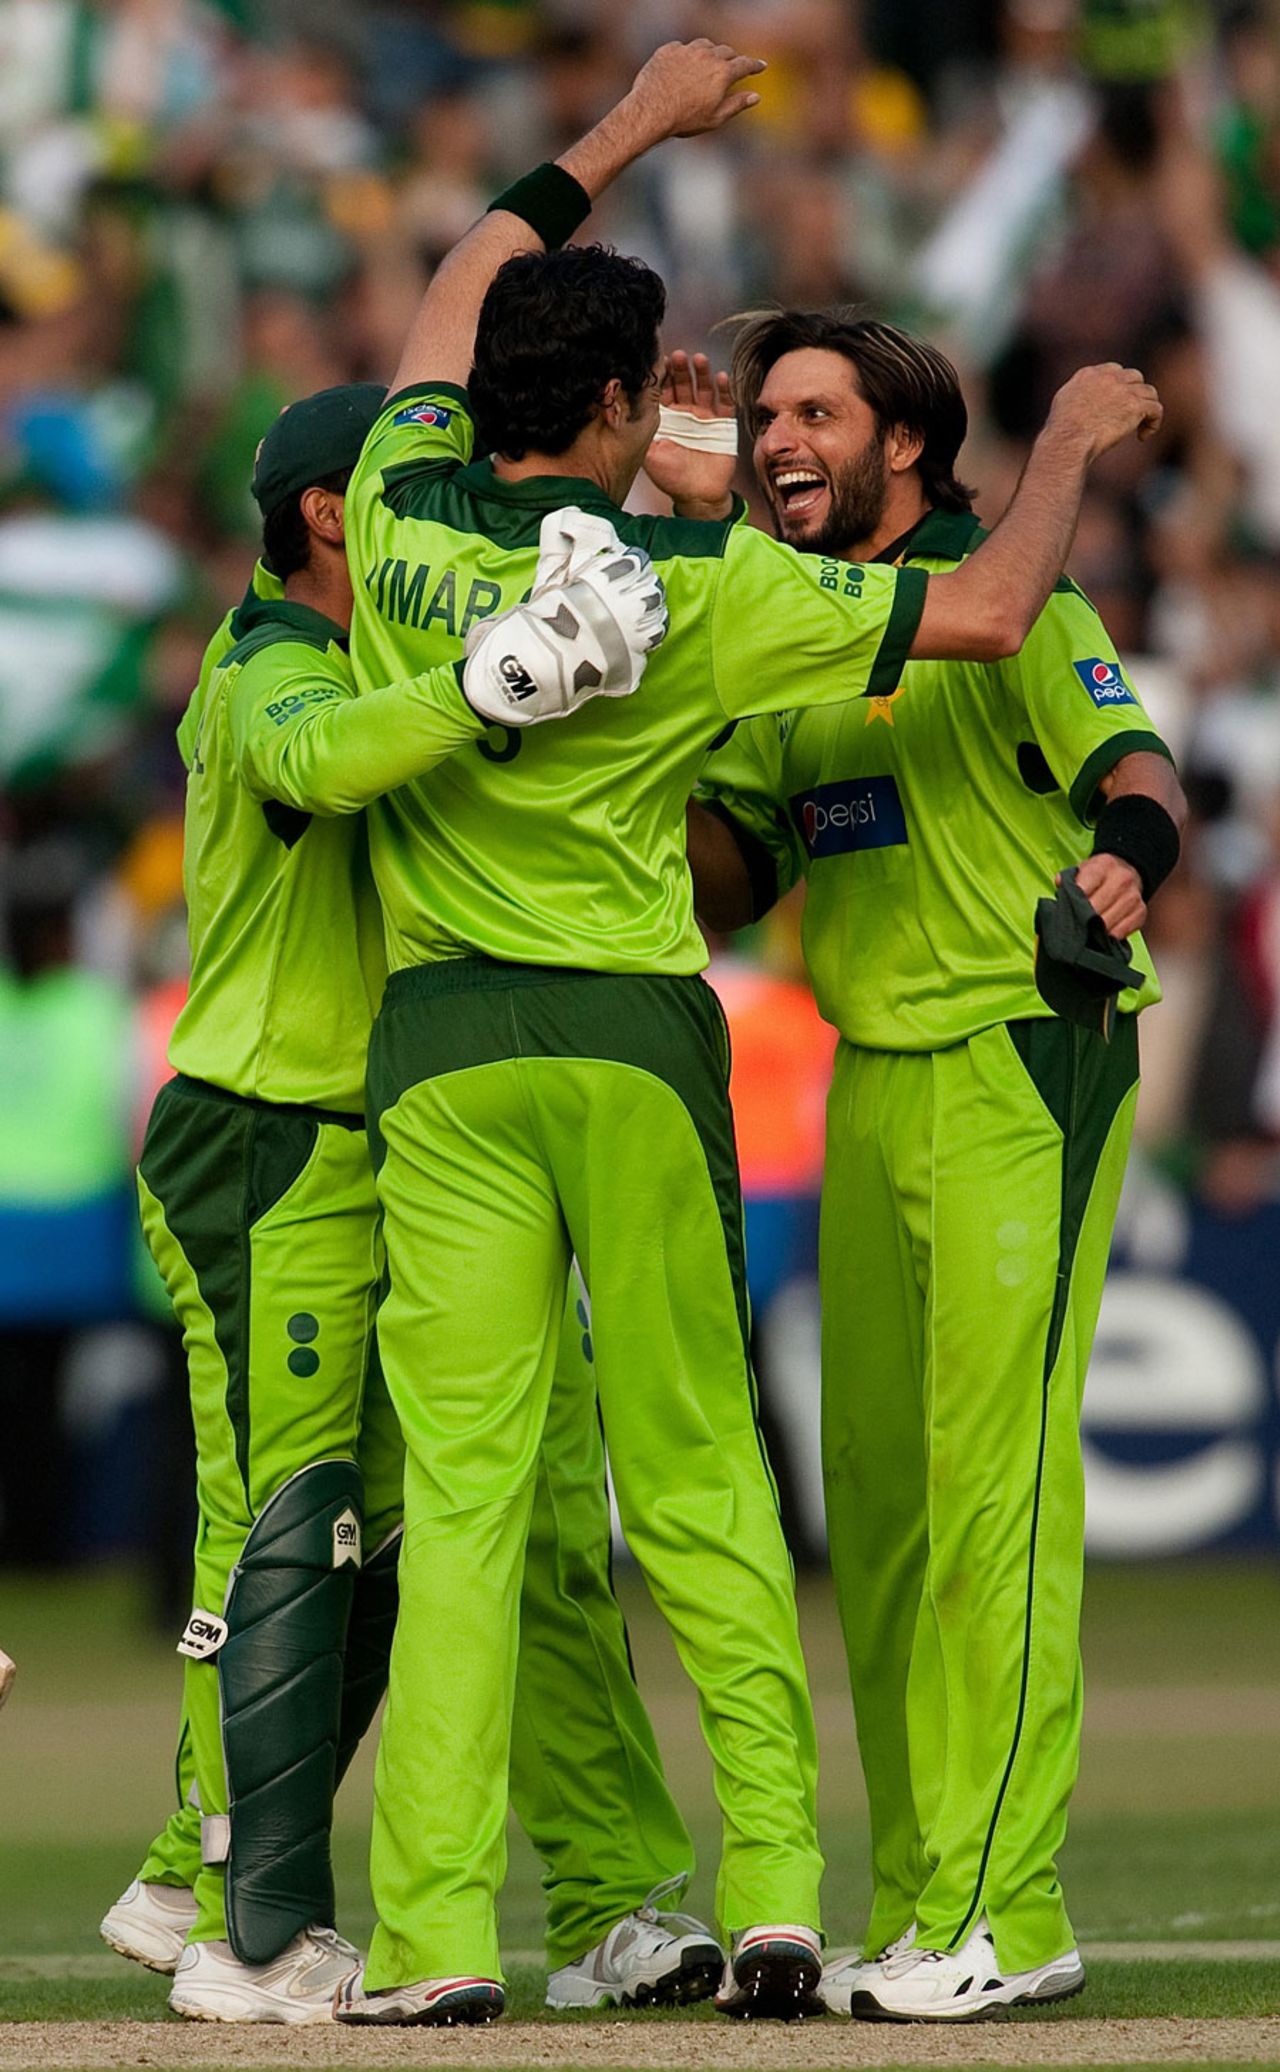 Pakistan knew victory was theirs when Umar Gul trapped Michael Hussey in front, Pakistan v Australia, 2nd Twenty20, Edgbaston, July 6 2010